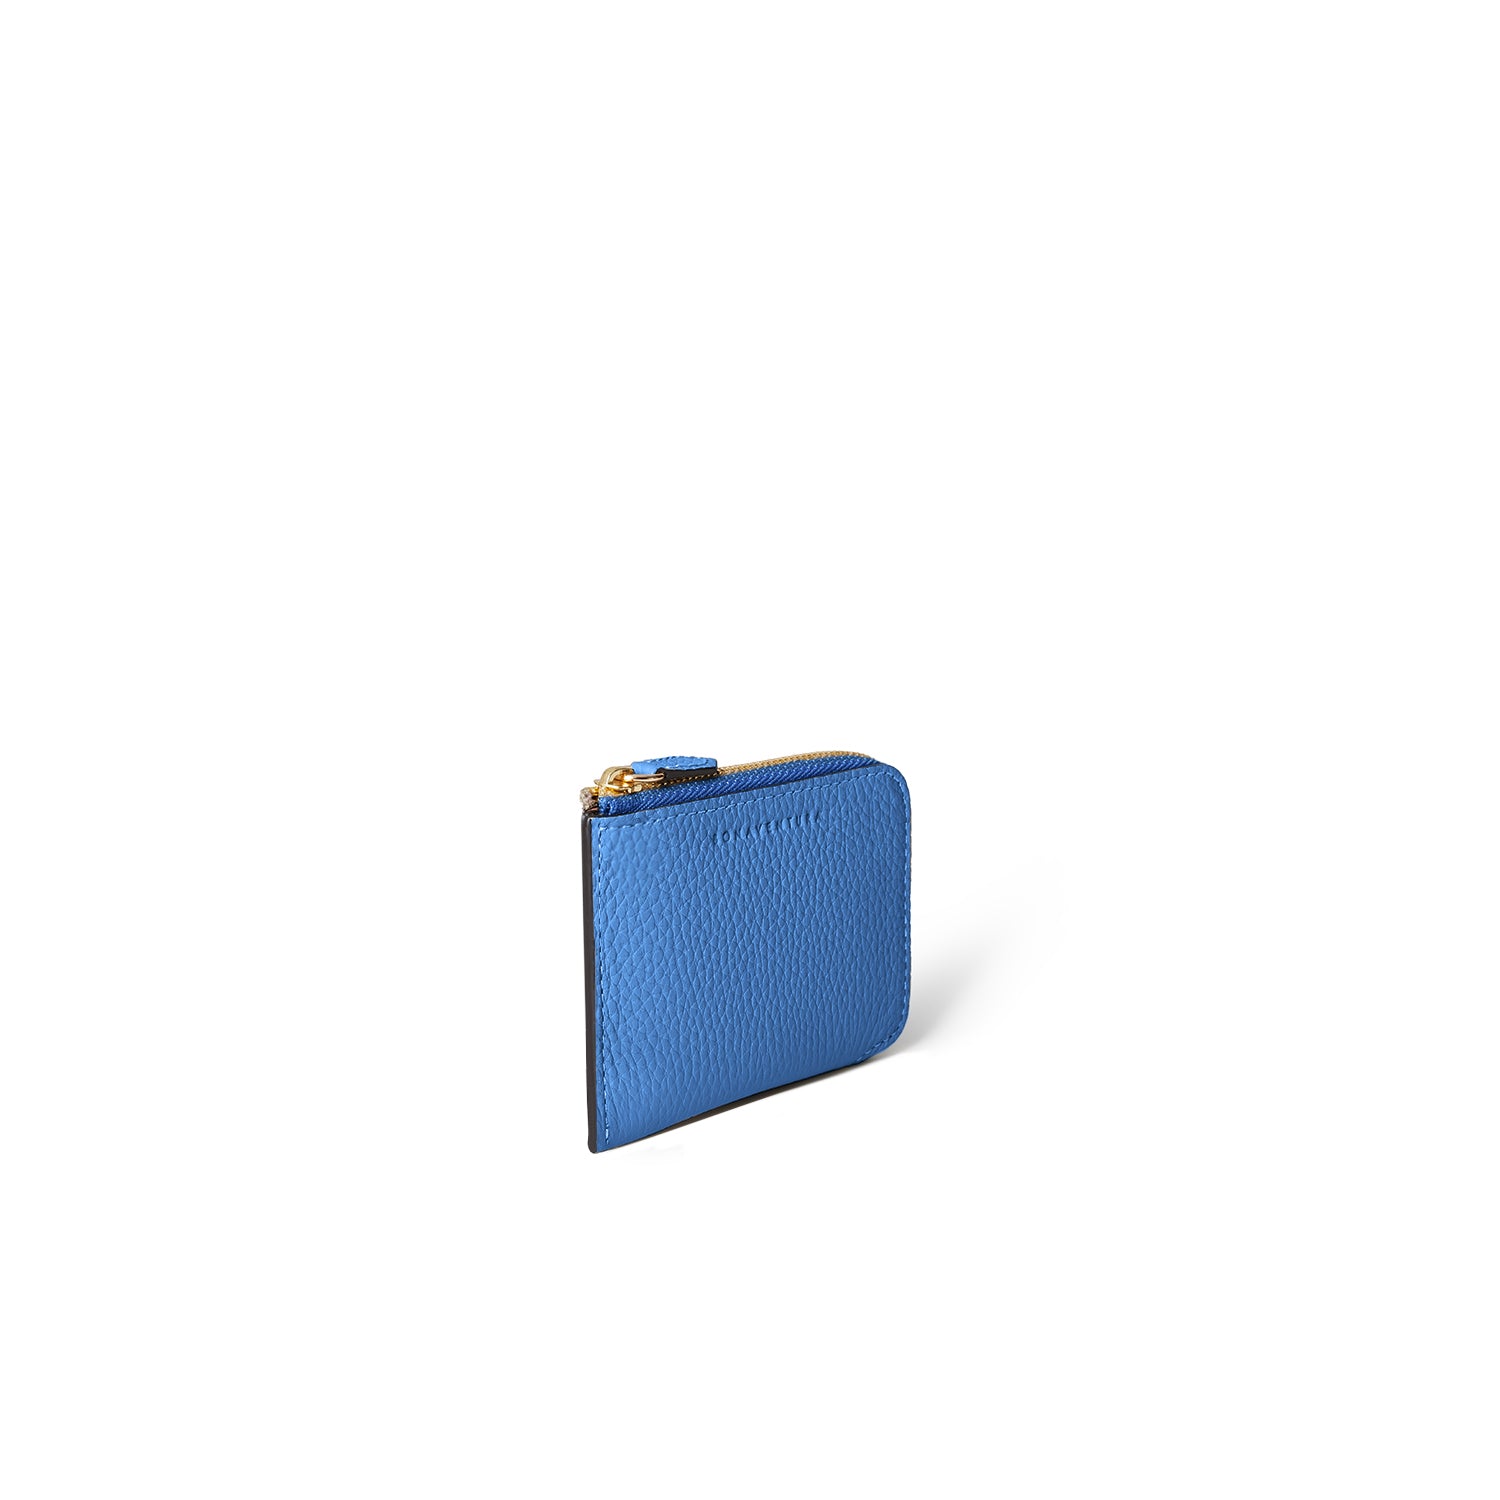 SAVOIA × BONAVENTURA Square Card and Coin Case in Shrink Leather